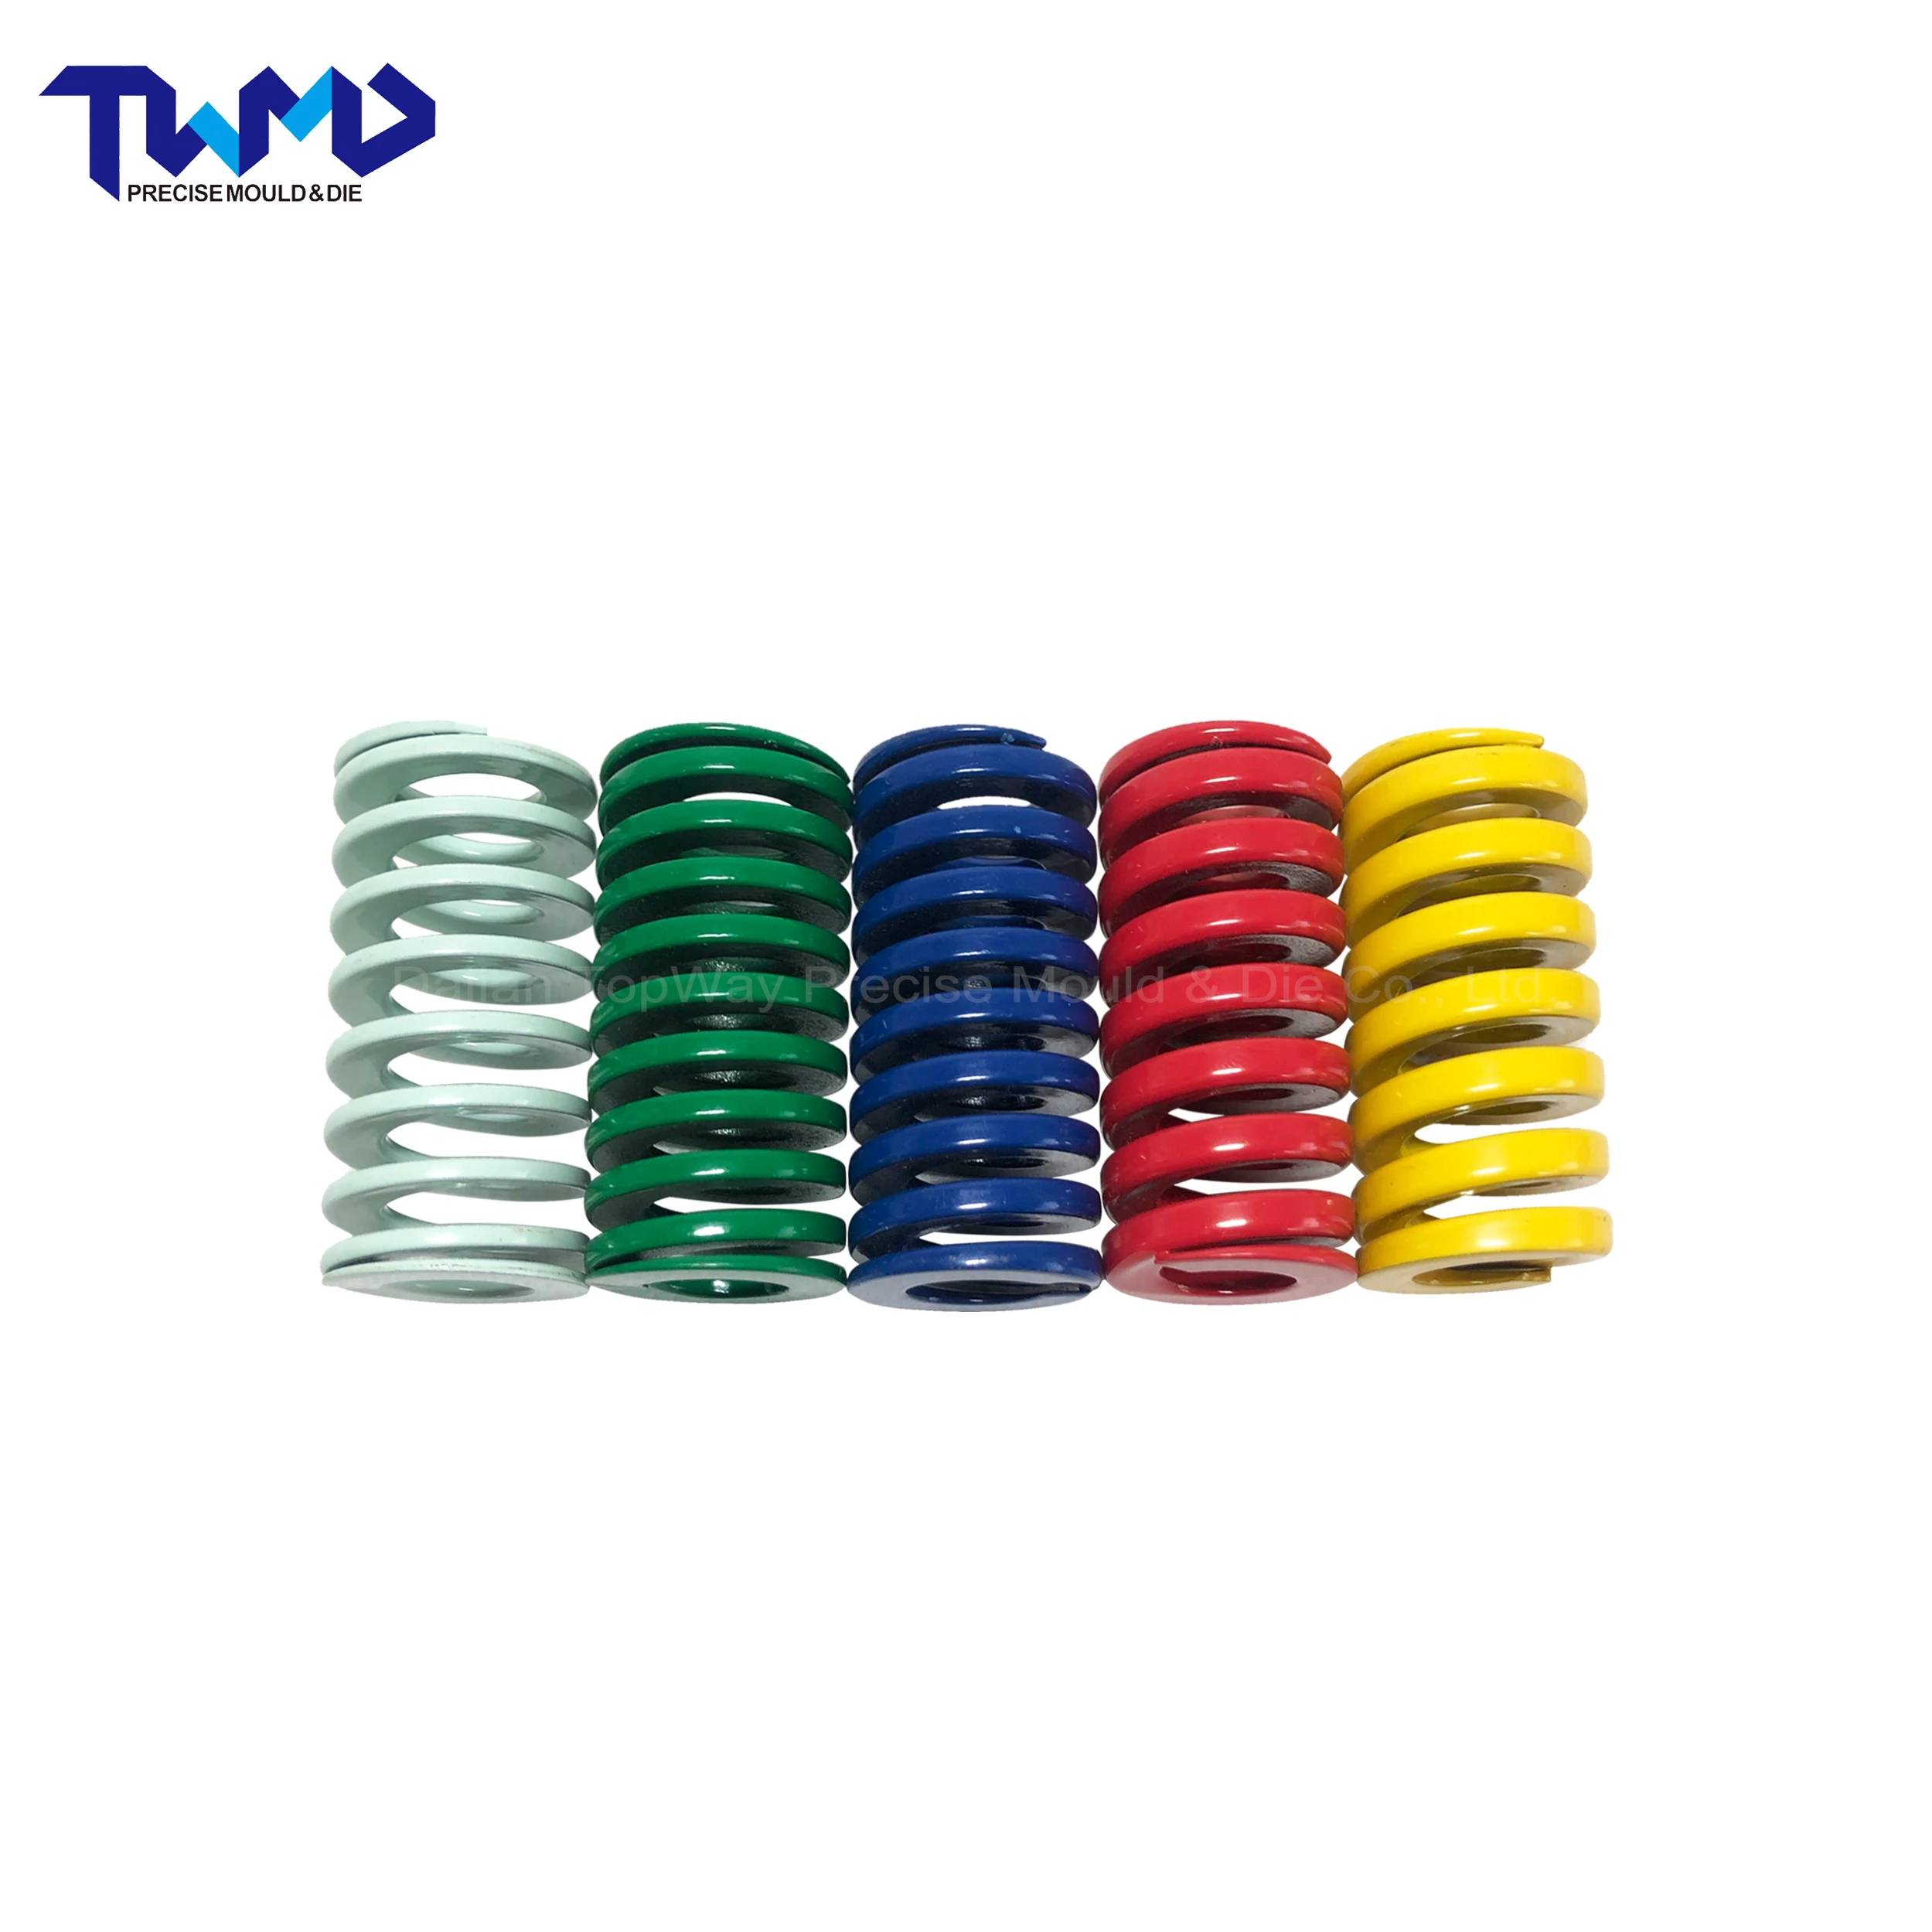 
ISO 10243 rectangular compression extra heavy load die mould spring 